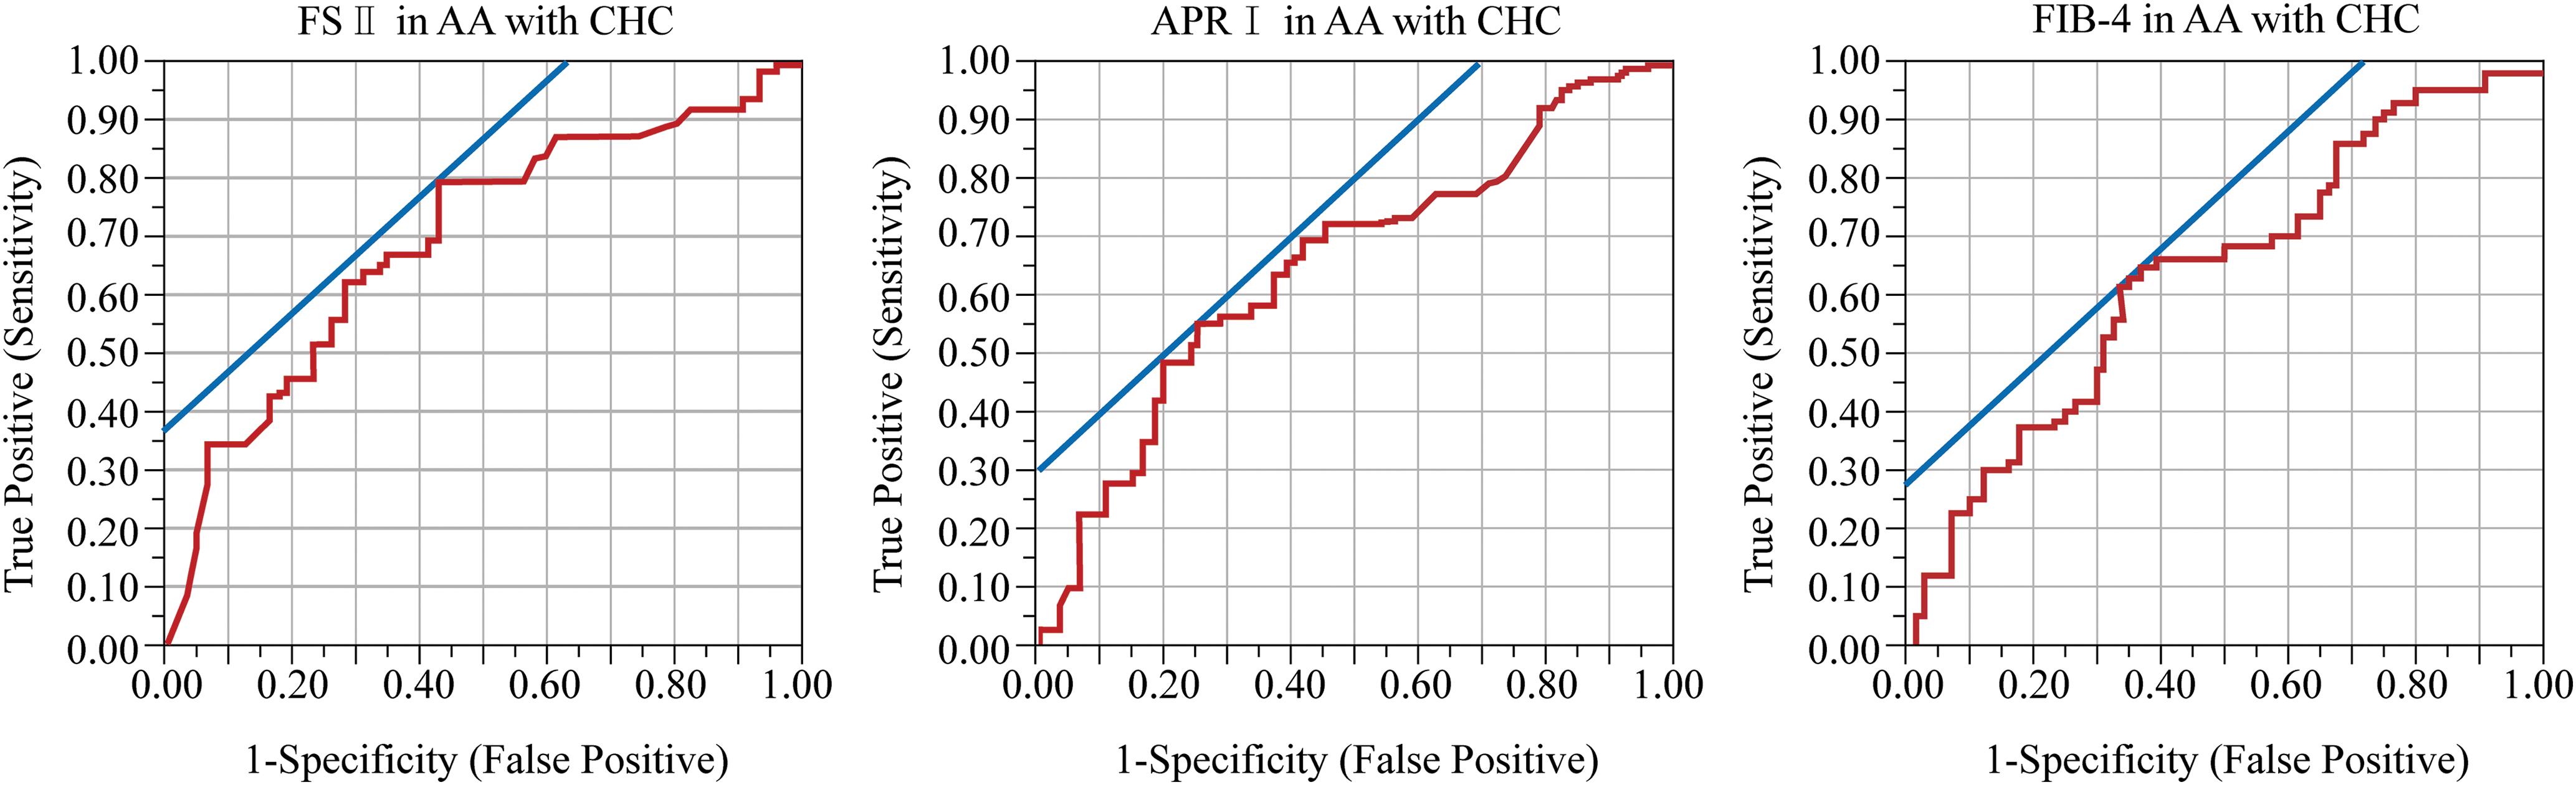 Receiver operating characteristic (ROC) curves of panels of markers of fibrosis (FSII, APRI, and FIB-4 index) among AA with CHC compared with biopsy METAVIR (as “gold standard”) to define true positive.